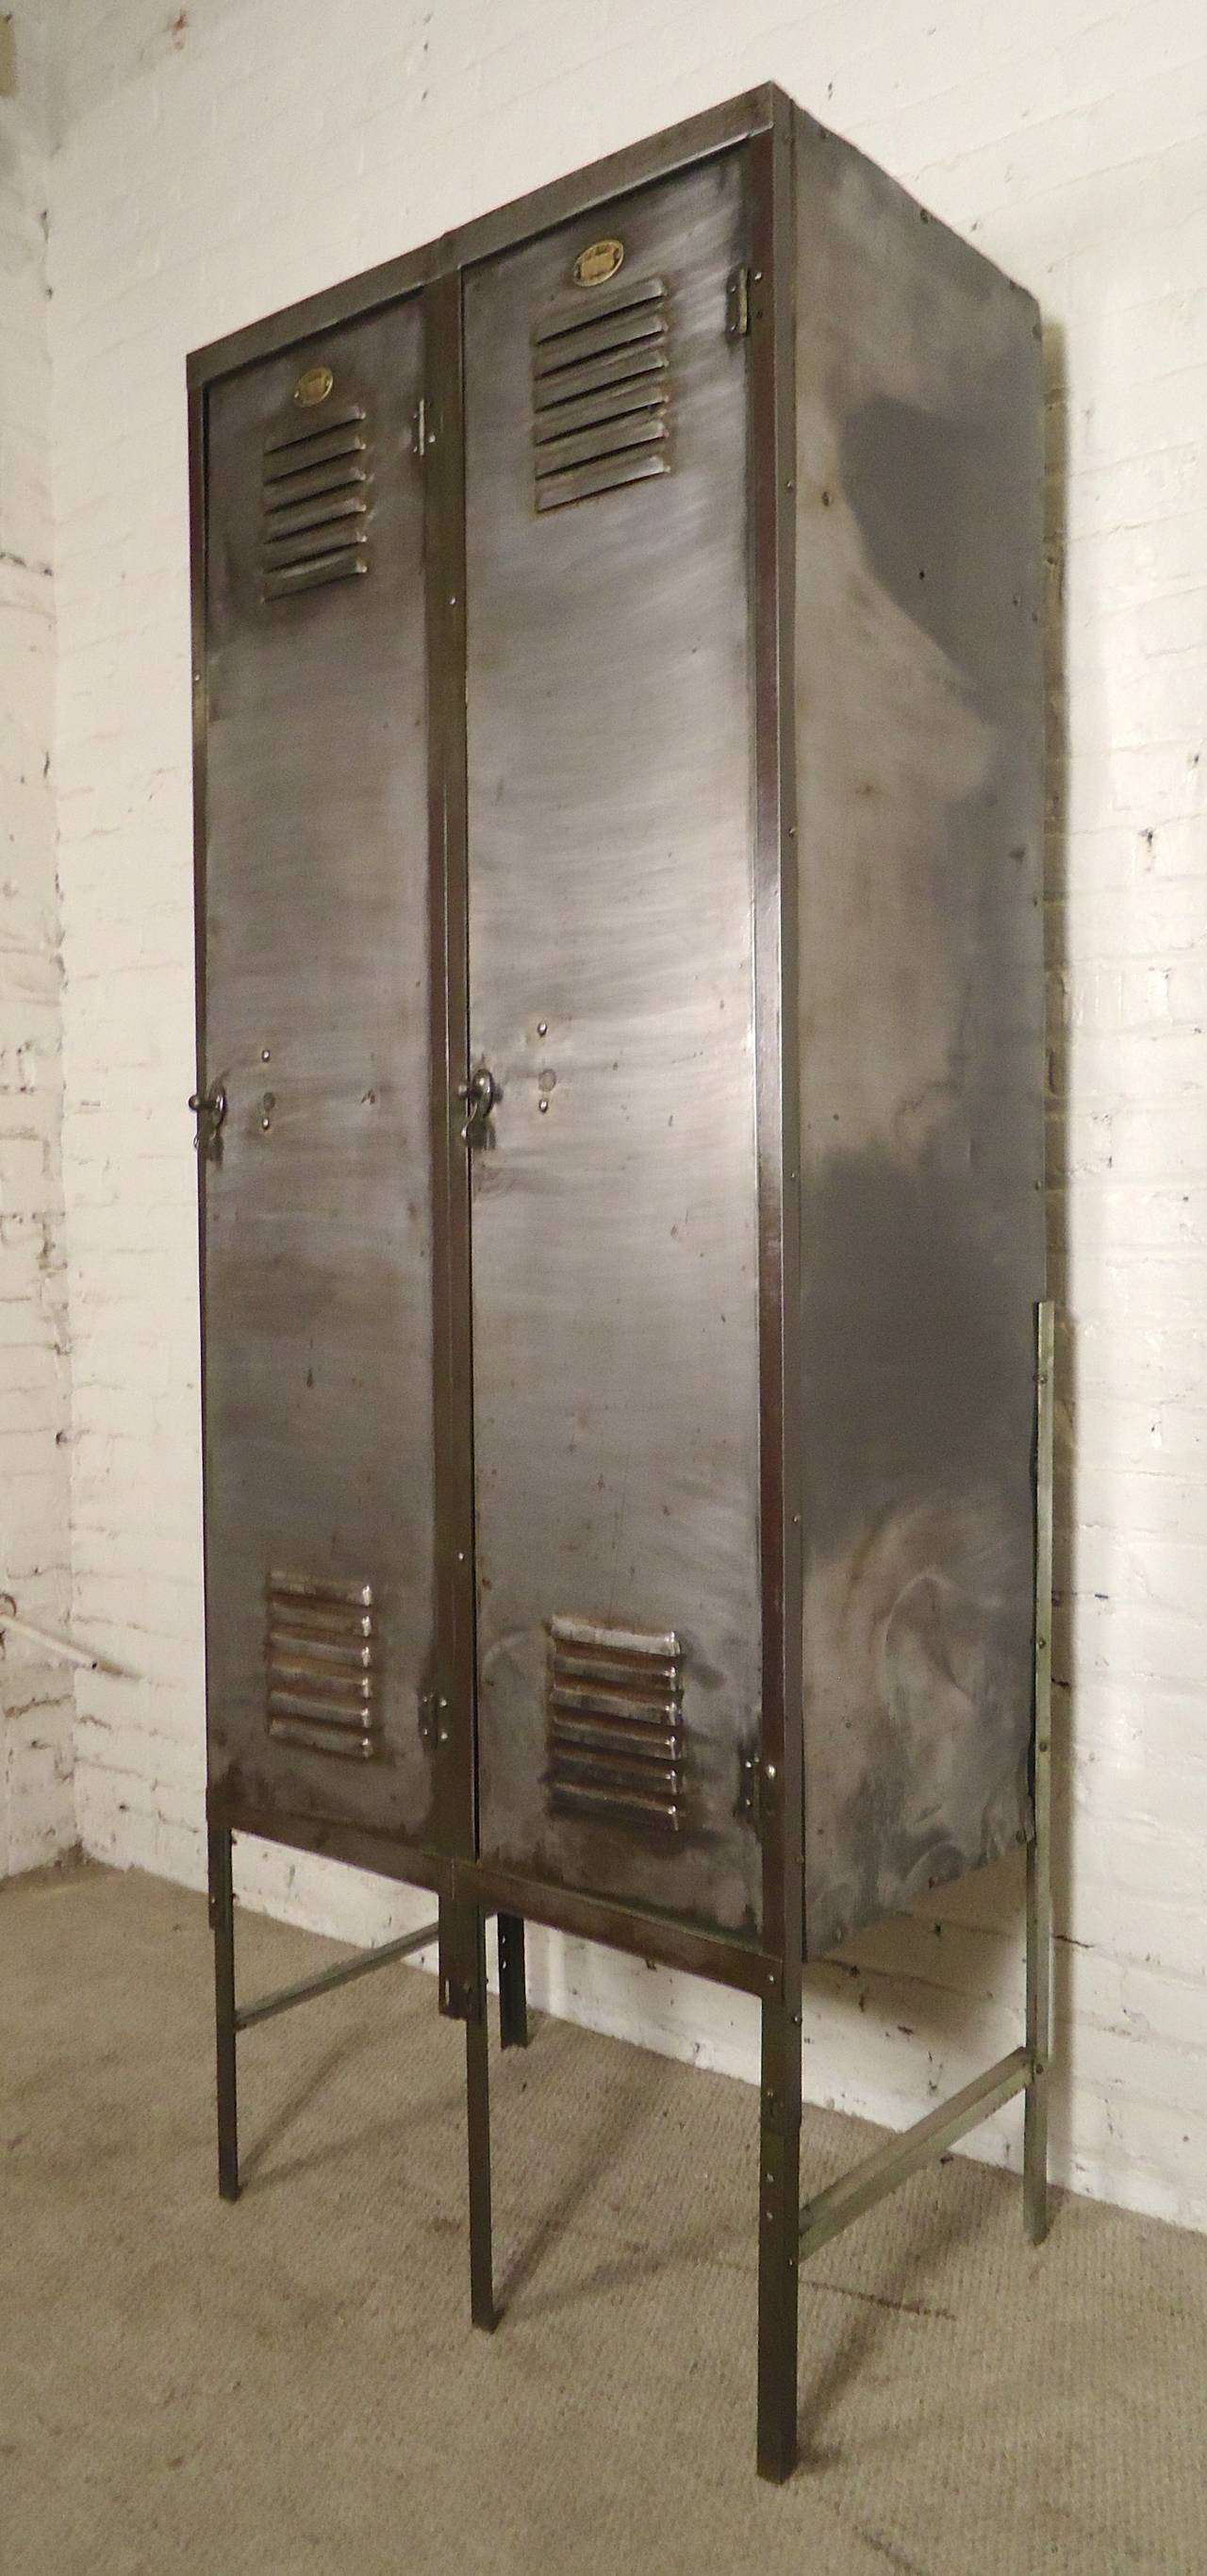 Large Refinished Metal Locker Unit In Distressed Condition In Brooklyn, NY